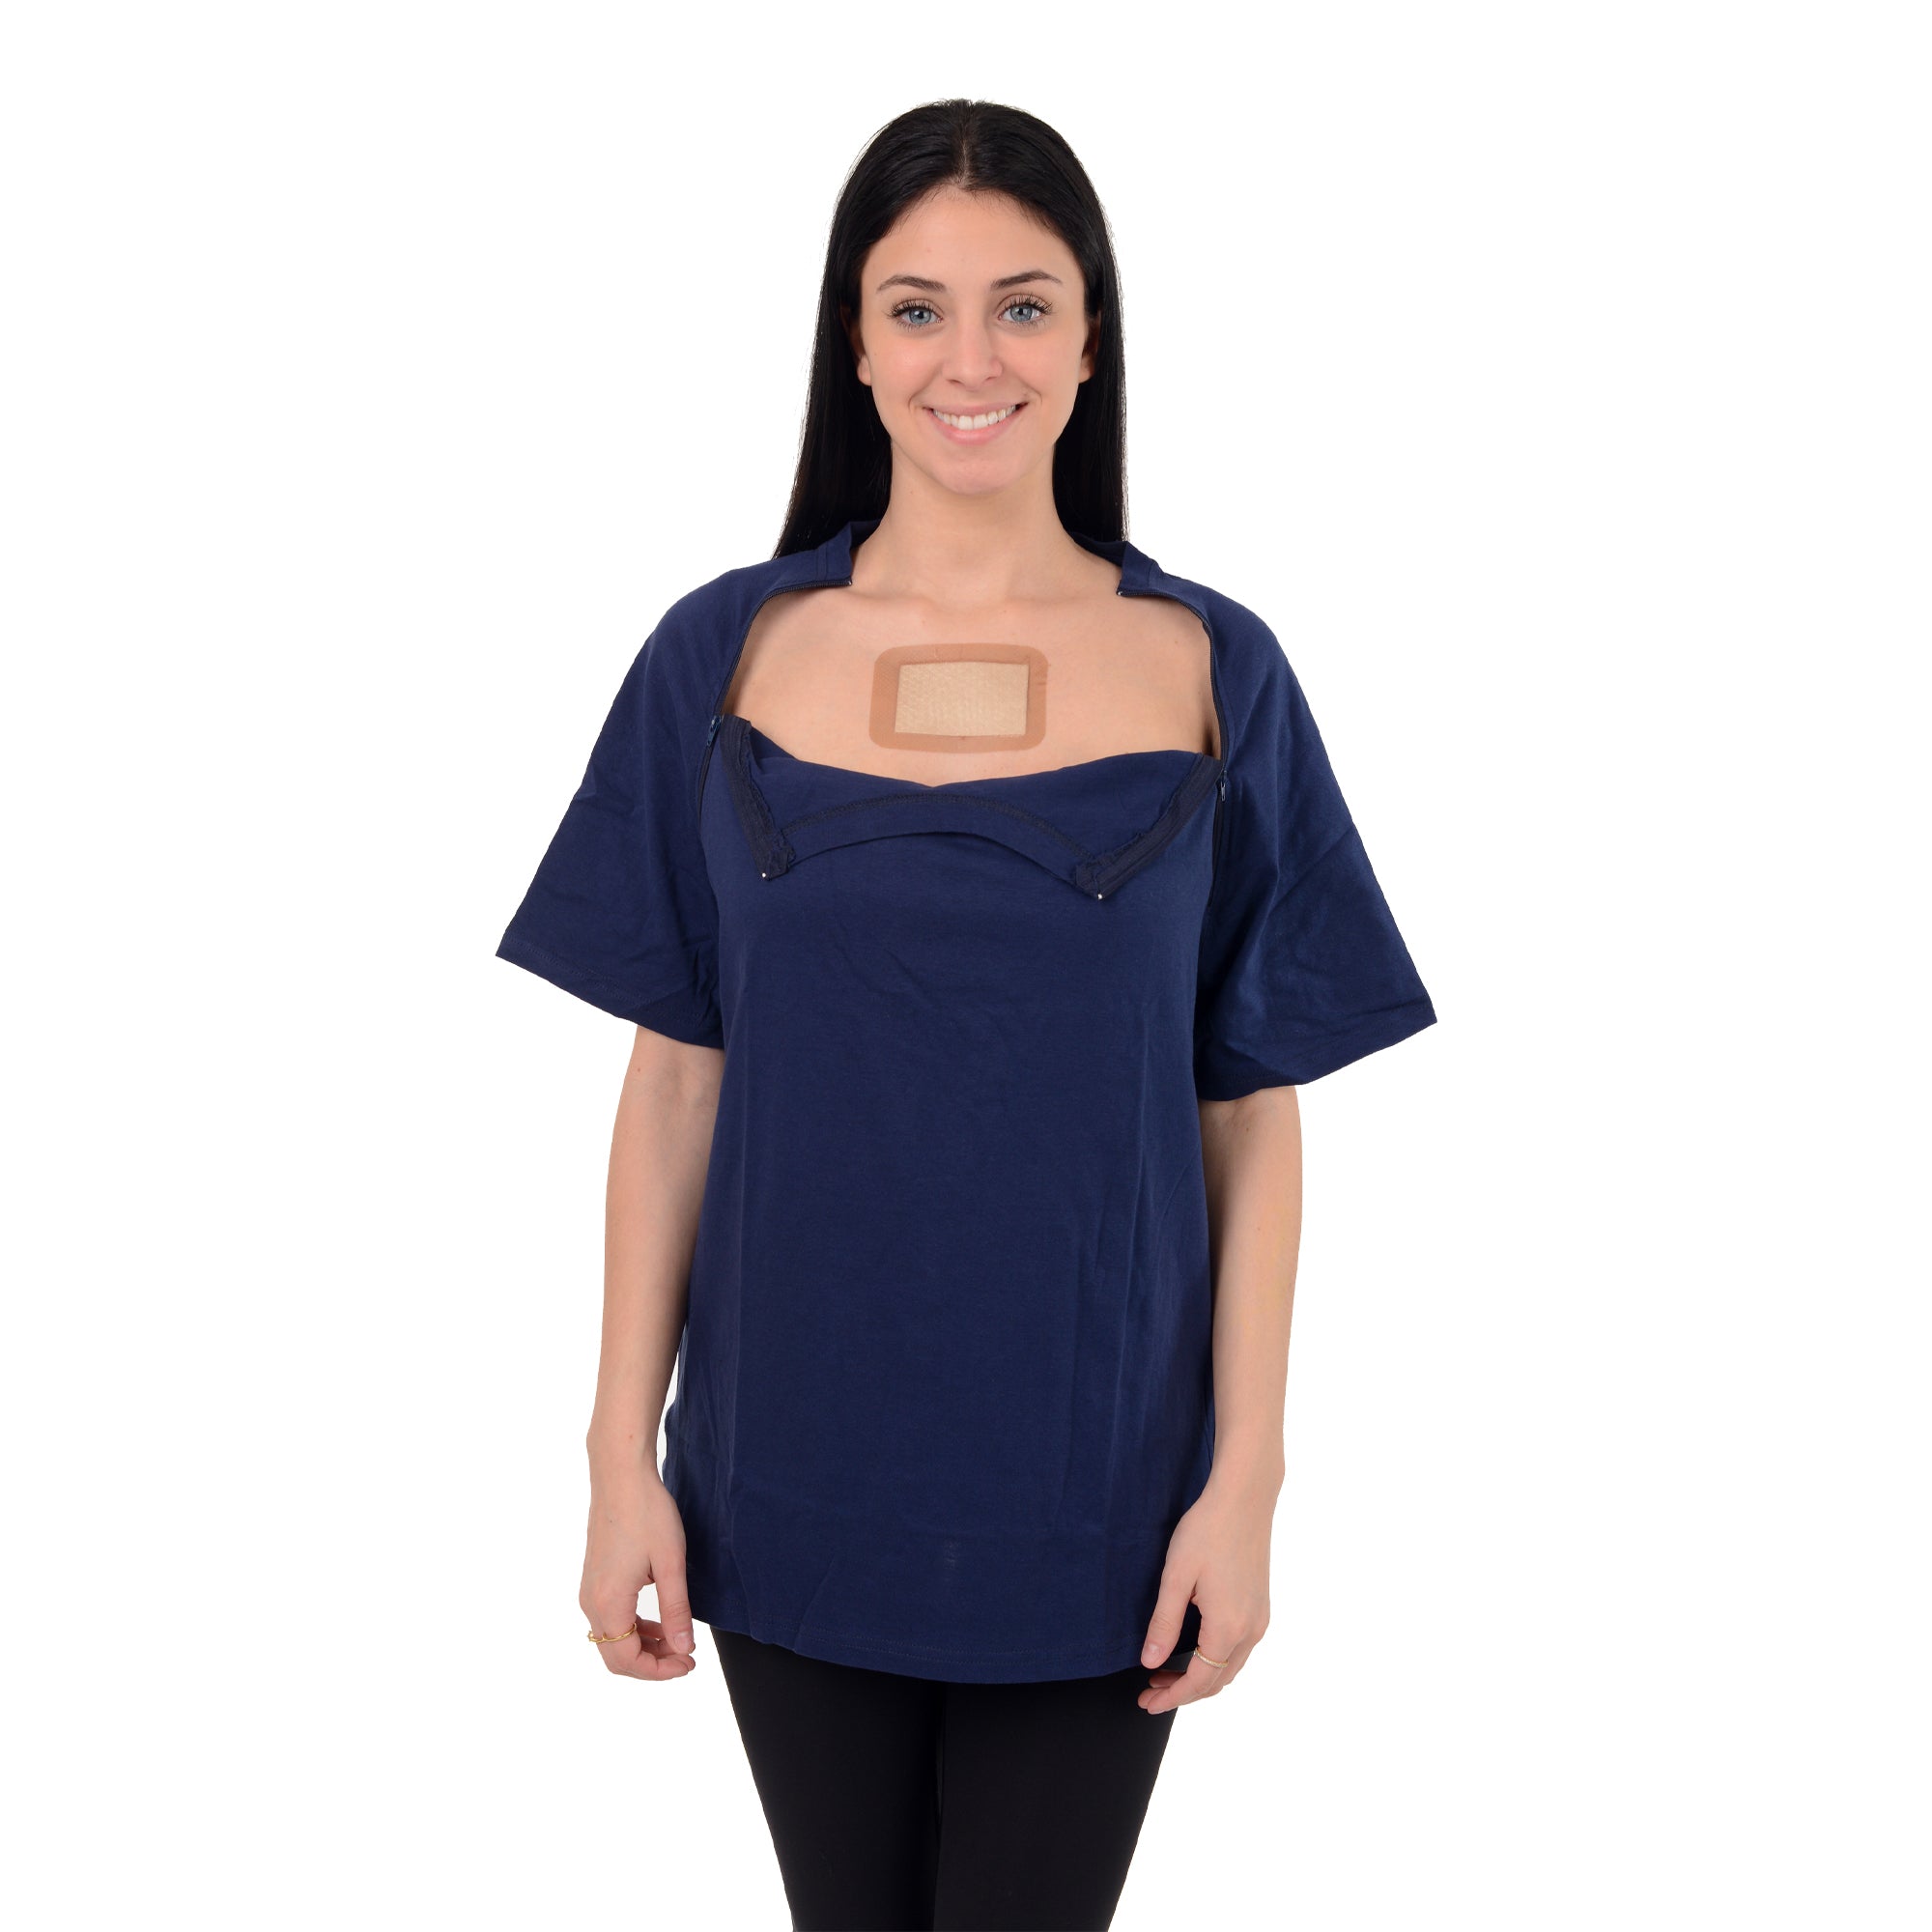 Post Mastectomy Band collar shirt with Drain pockets Camisole for Drai